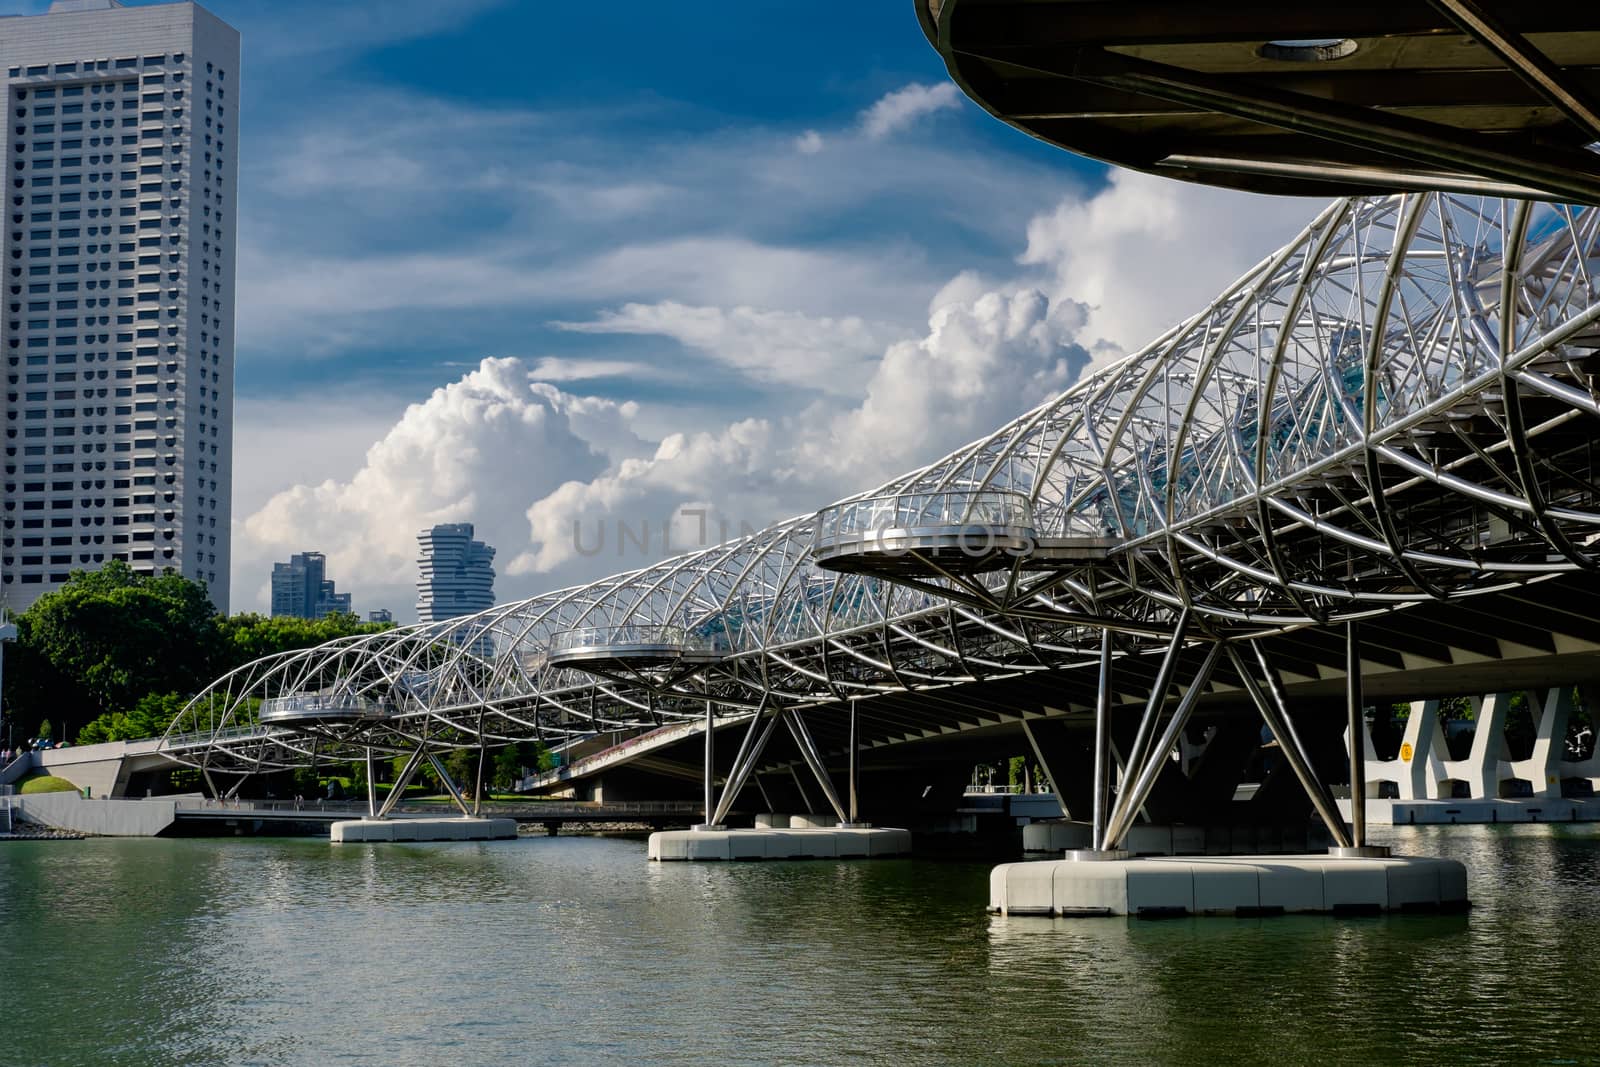 Helix Bridge at sunlight with clouds in the background in Singap by rainfallsup